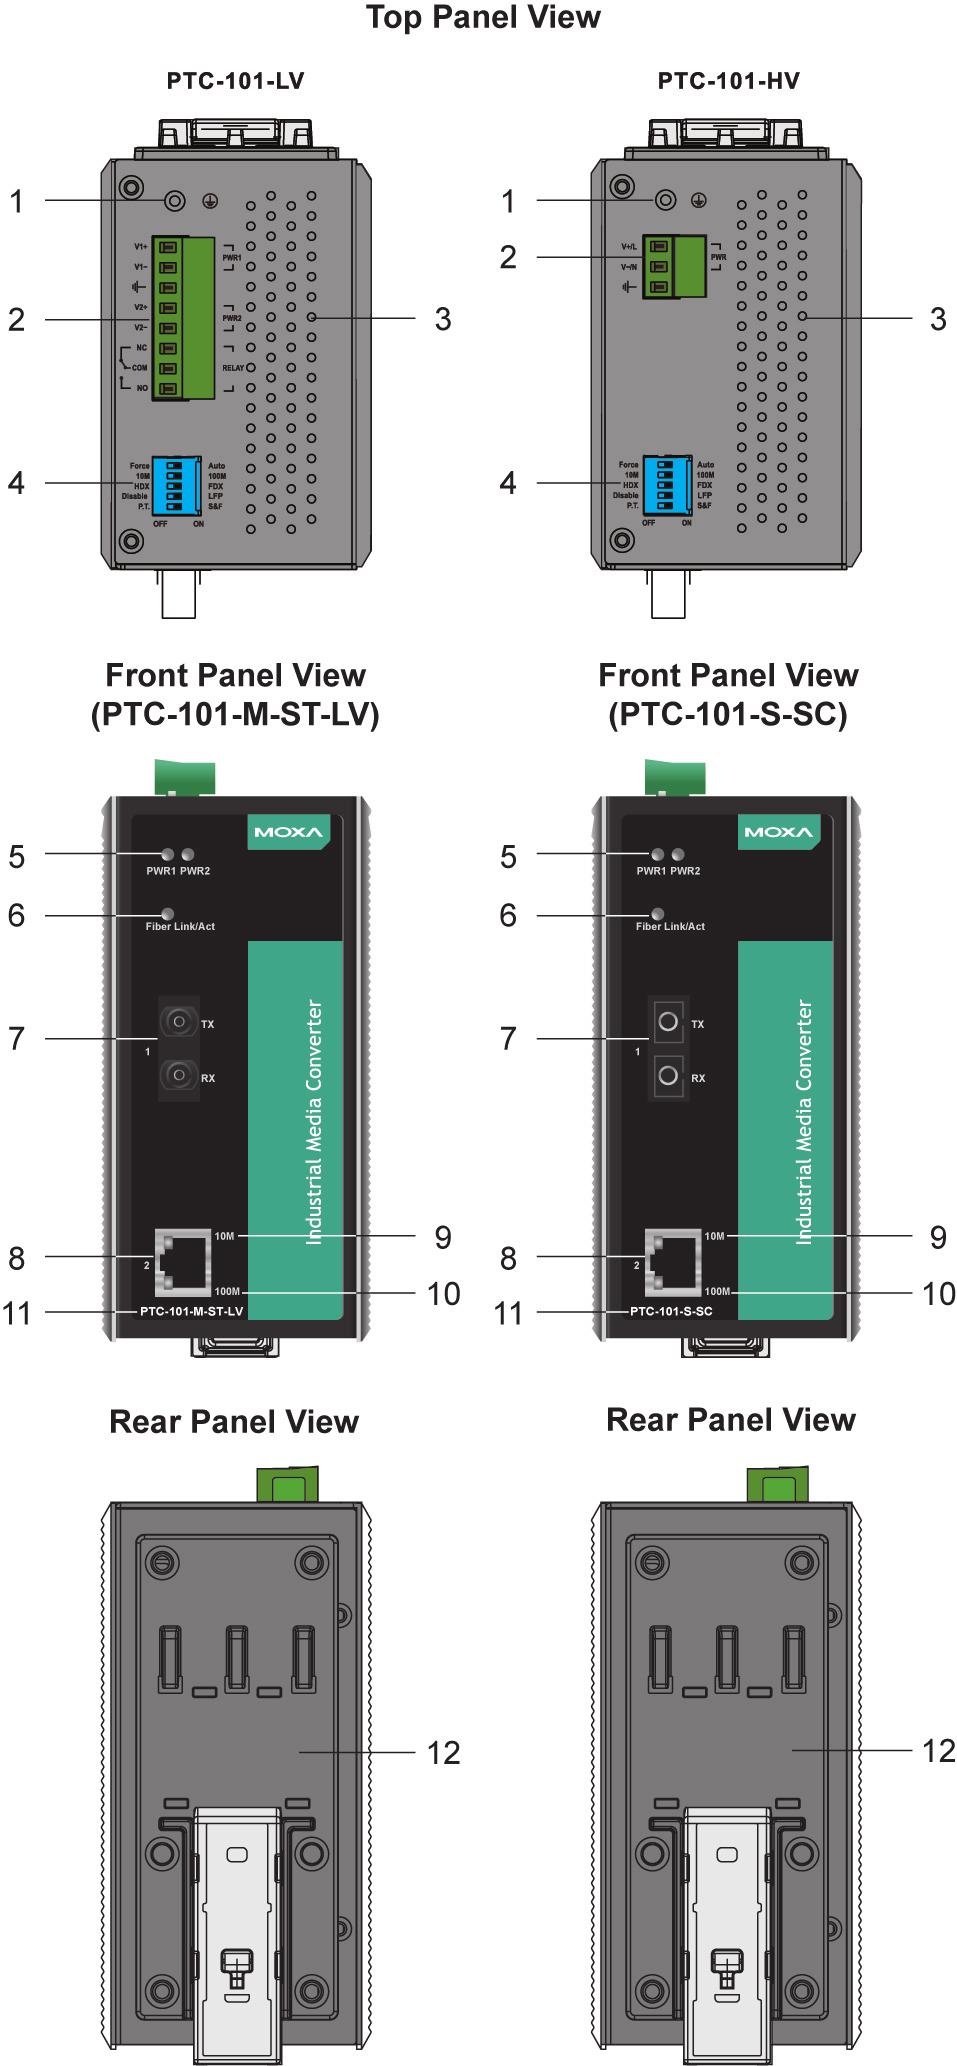 Panel Layout of the PTC-101 Series 1. Grounding screw 2. Terminal block for power input 3. Heat dissipation vents and relay output 4. DIP switch 5. Power input PWR LED 6.